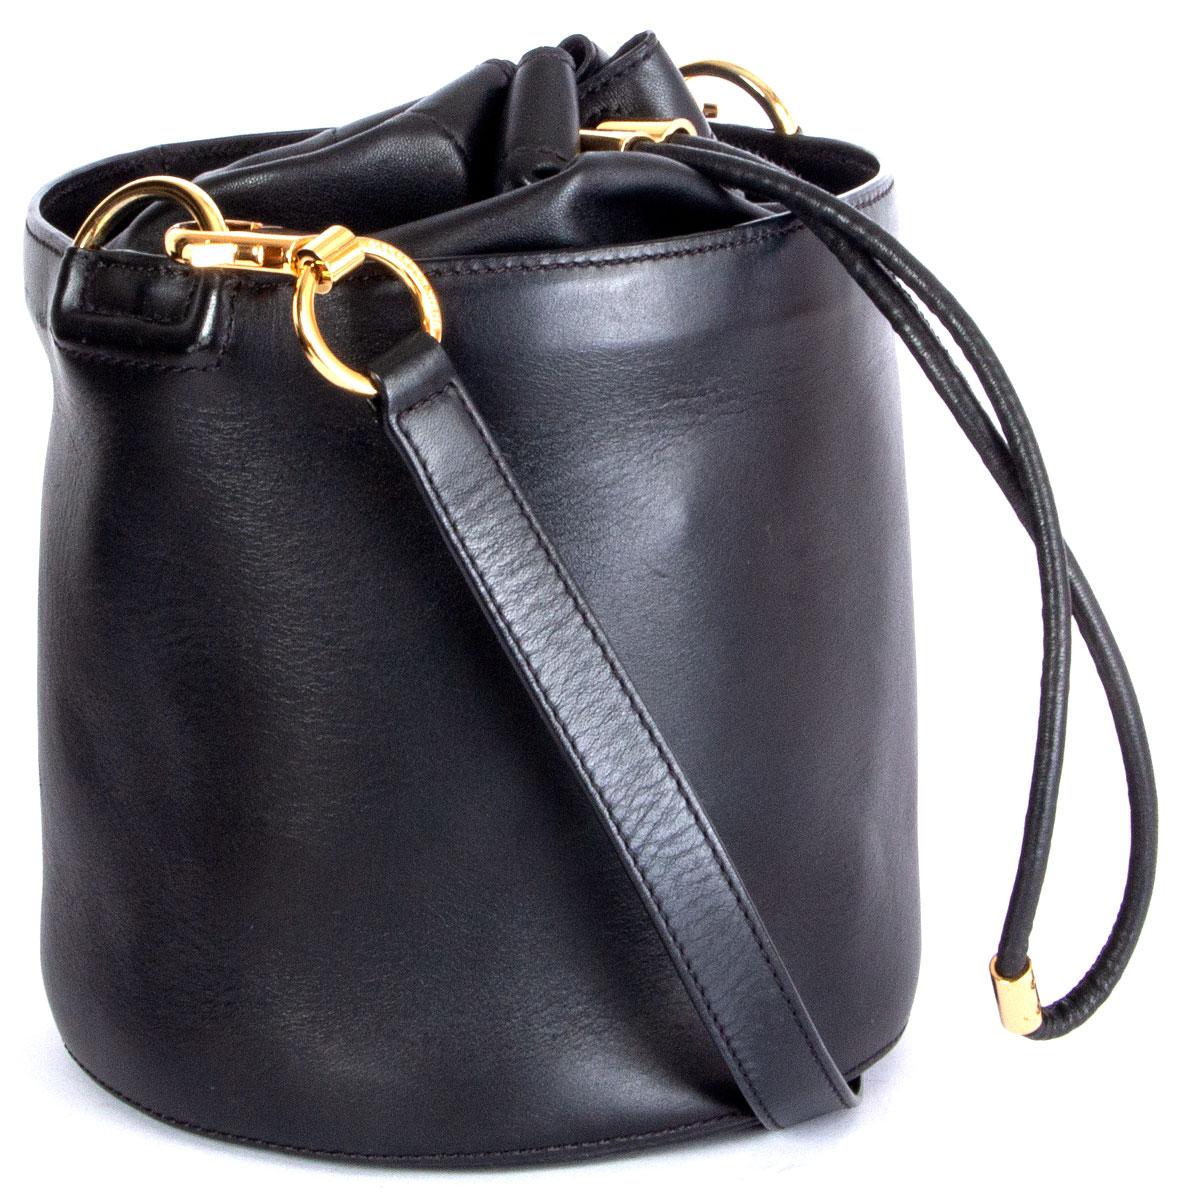 100% authentic Alexander Wang bucket bag in black smooth leather with drawstring closure and gold-tone hardware. Lined in black nylon with one zipper pocket against the back and one open pocket against the front. Comes with an adjustable shoulder